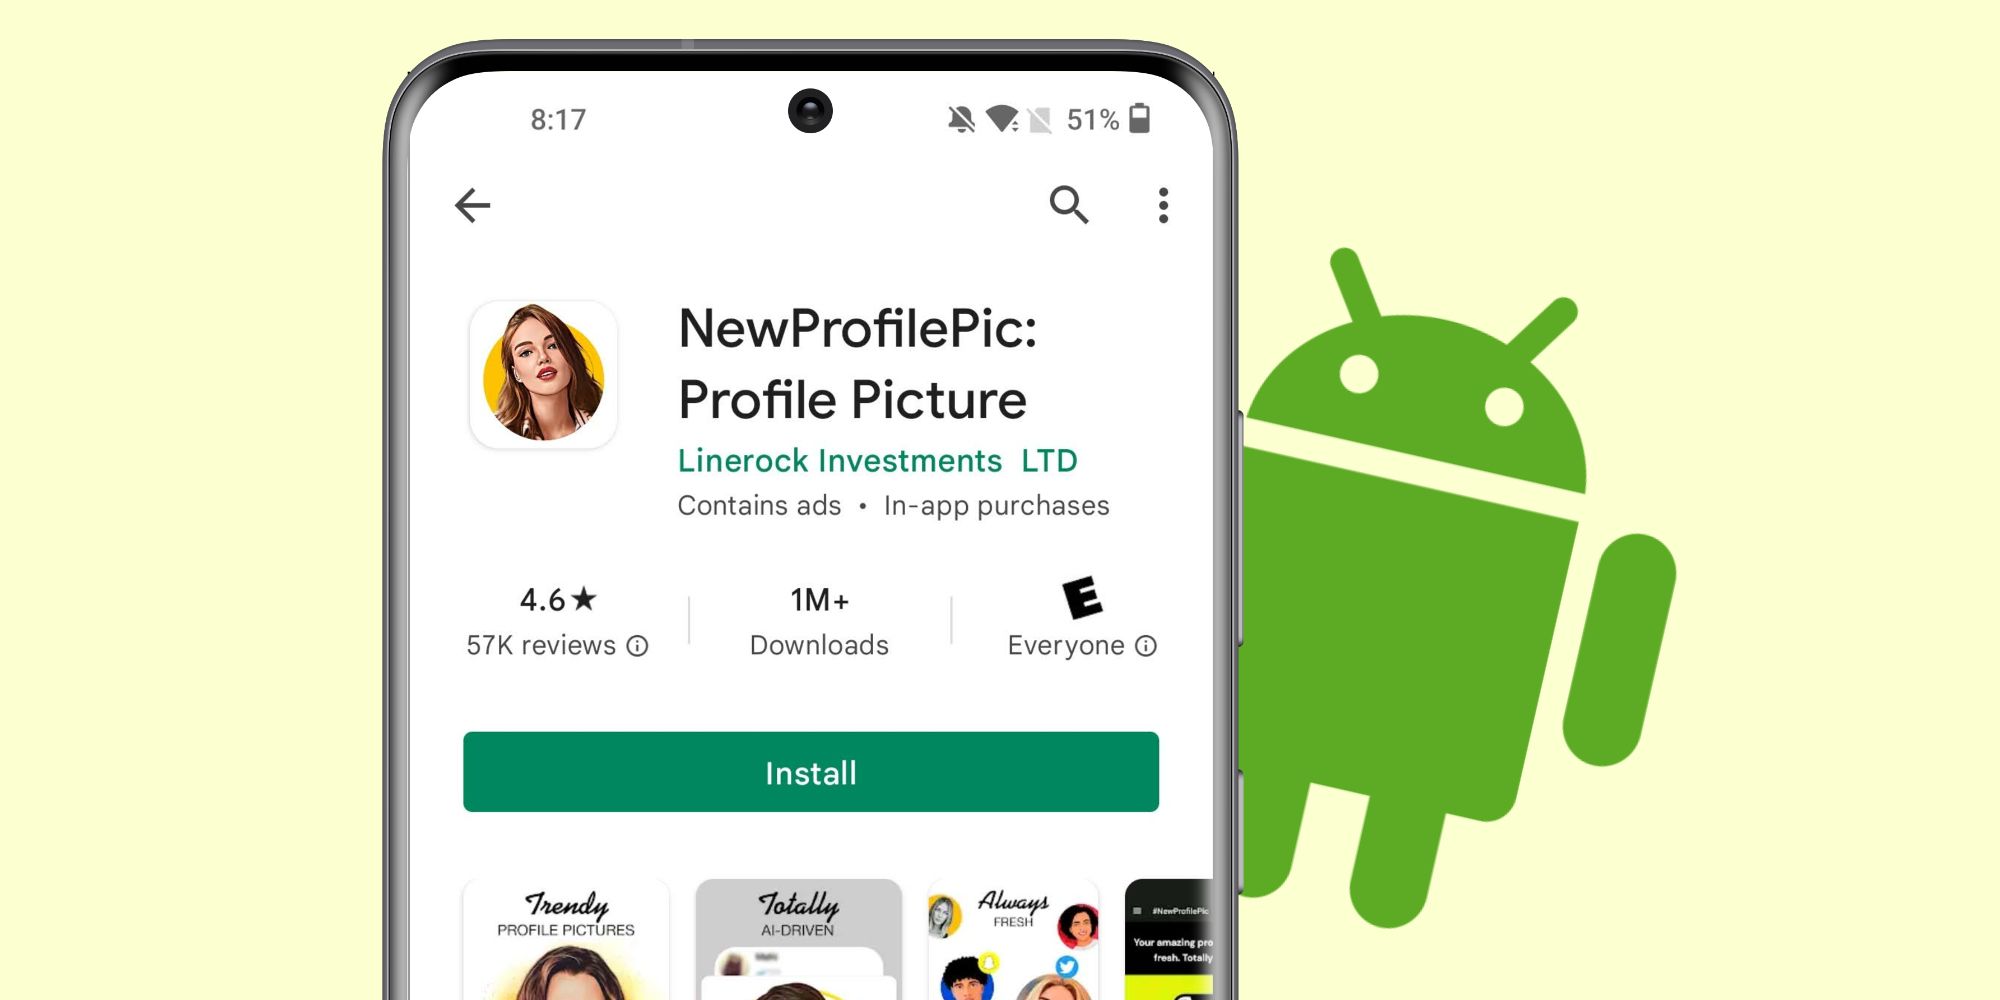 Is The New Profile Pic App On Android? Everything You Need To Know